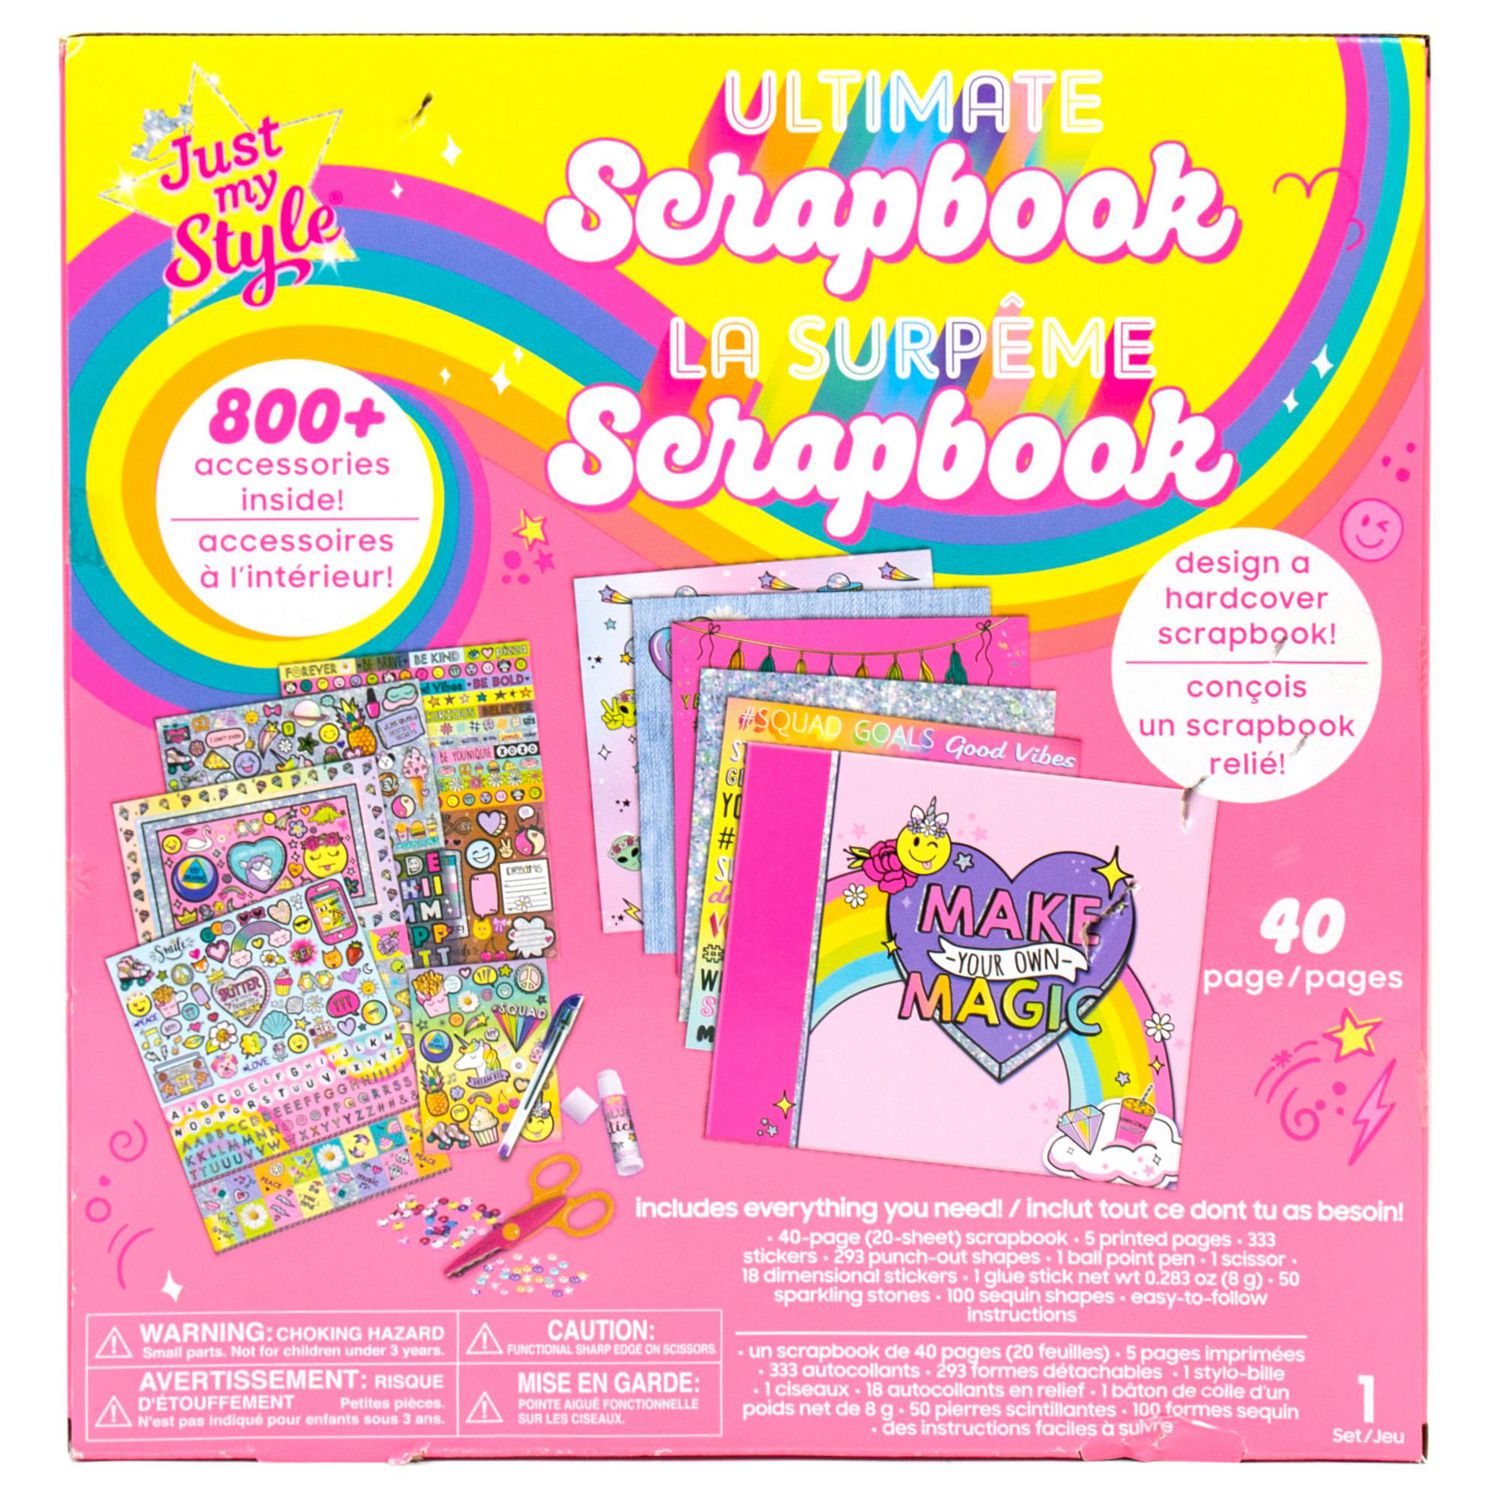 Just My Style Ultimate Scrapbook